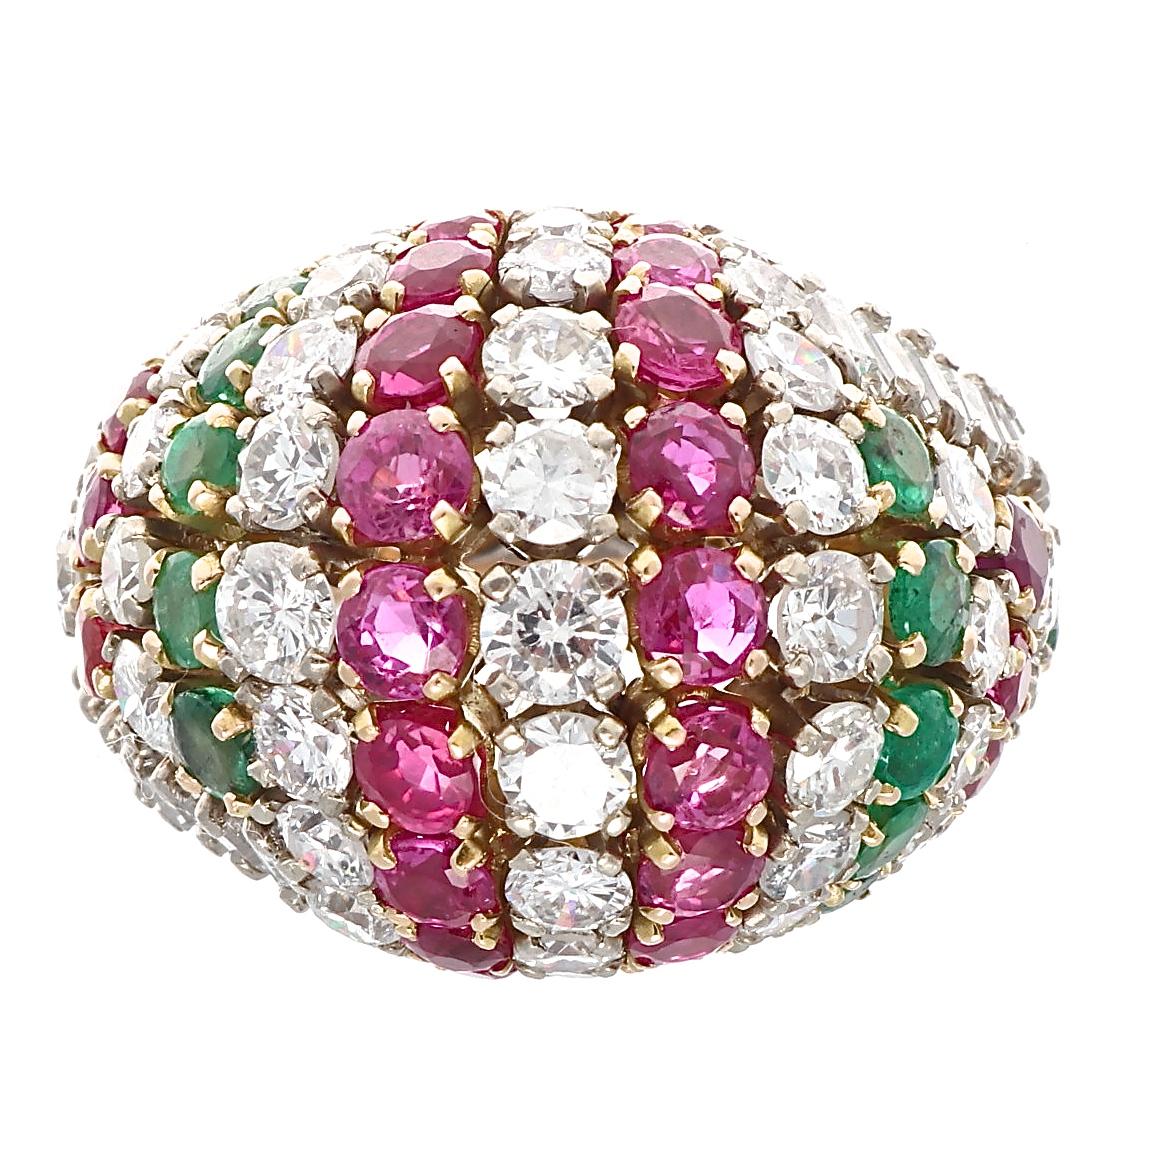 A dazzling display of color that lights up any room. Designed in alternating rows of diamonds, rubies and emeralds. Crafted in 18k yellow gold. Ring size 5 3/4 and may be re-sized to fit. 